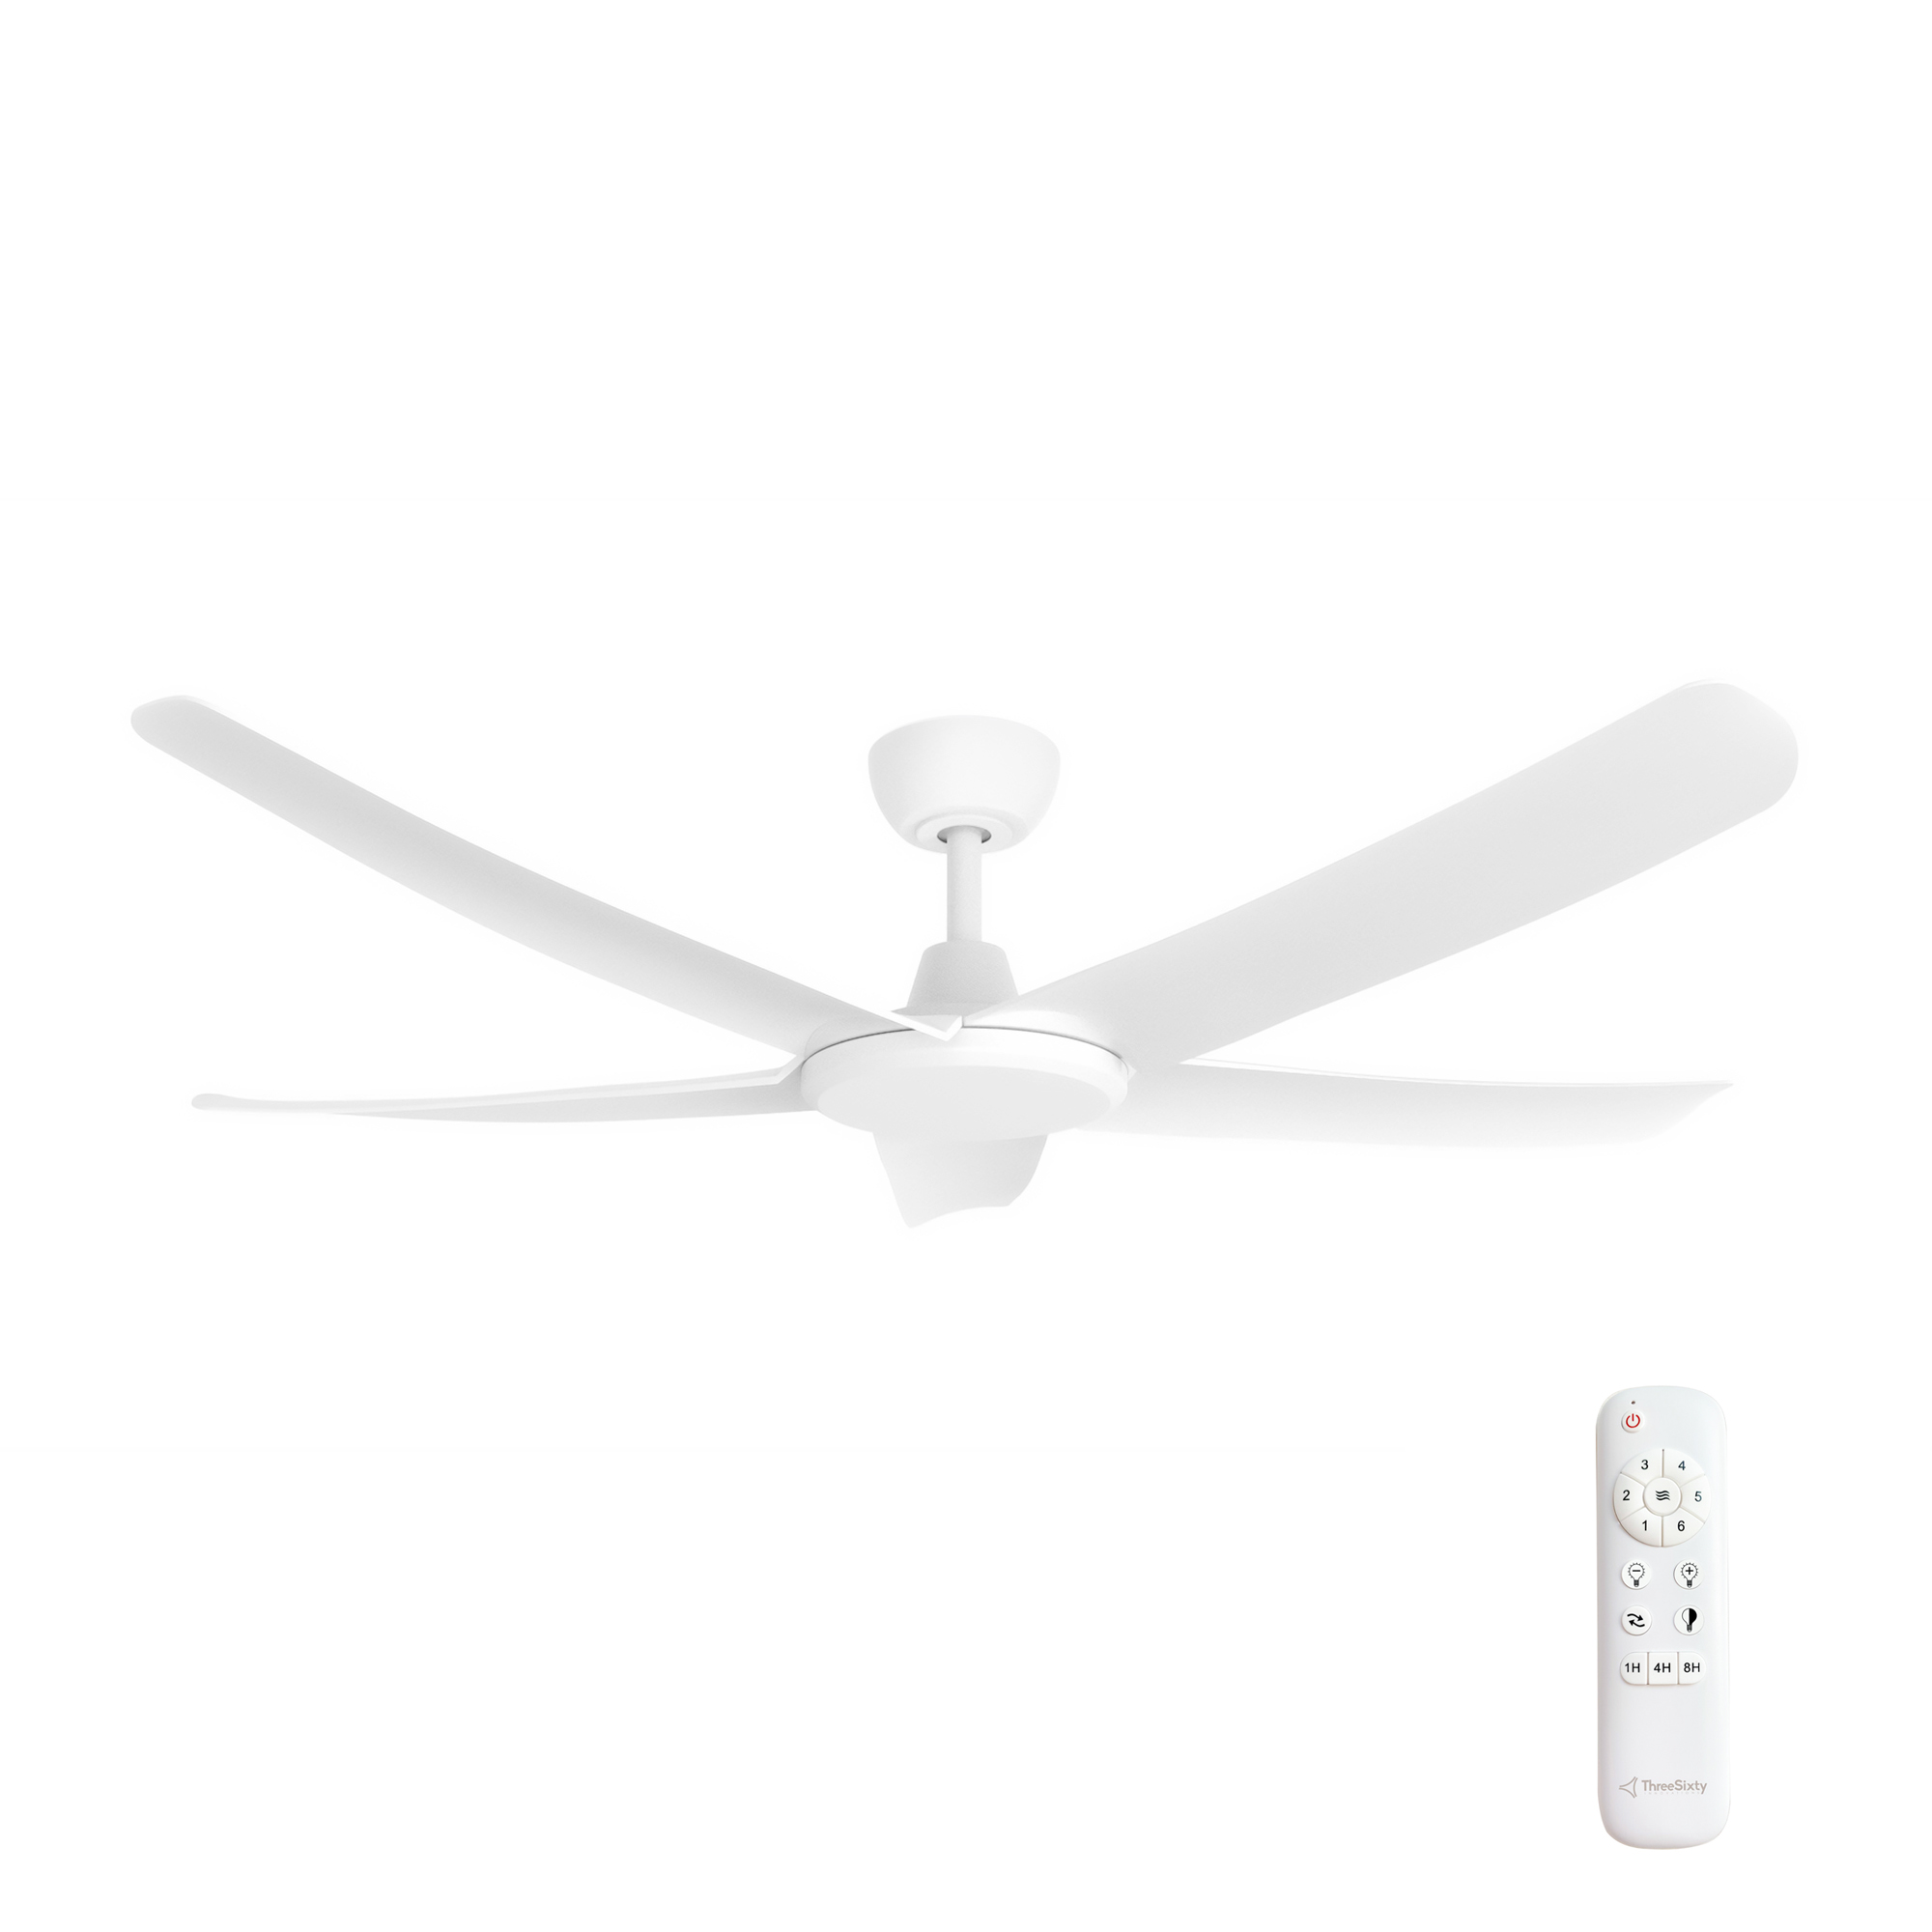 52" FlatJET DC Ceiling Fan in Matte White with 5 Blades